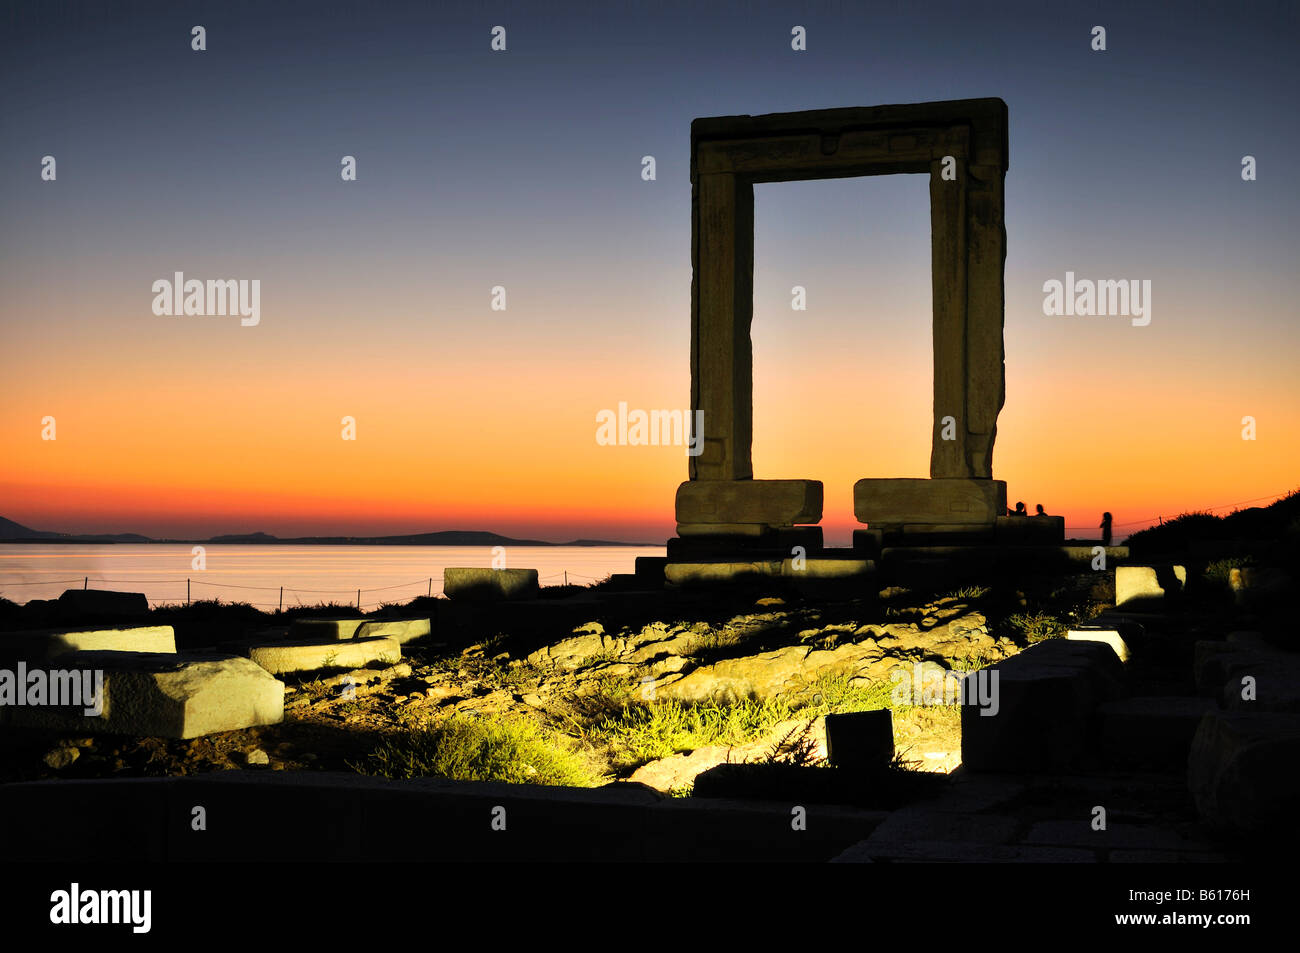 Gateway to antiquity, giant door or Portara of the Temple of Apollo at the town of Naxos, Cyclades Island Group, Greece, Europe Stock Photo